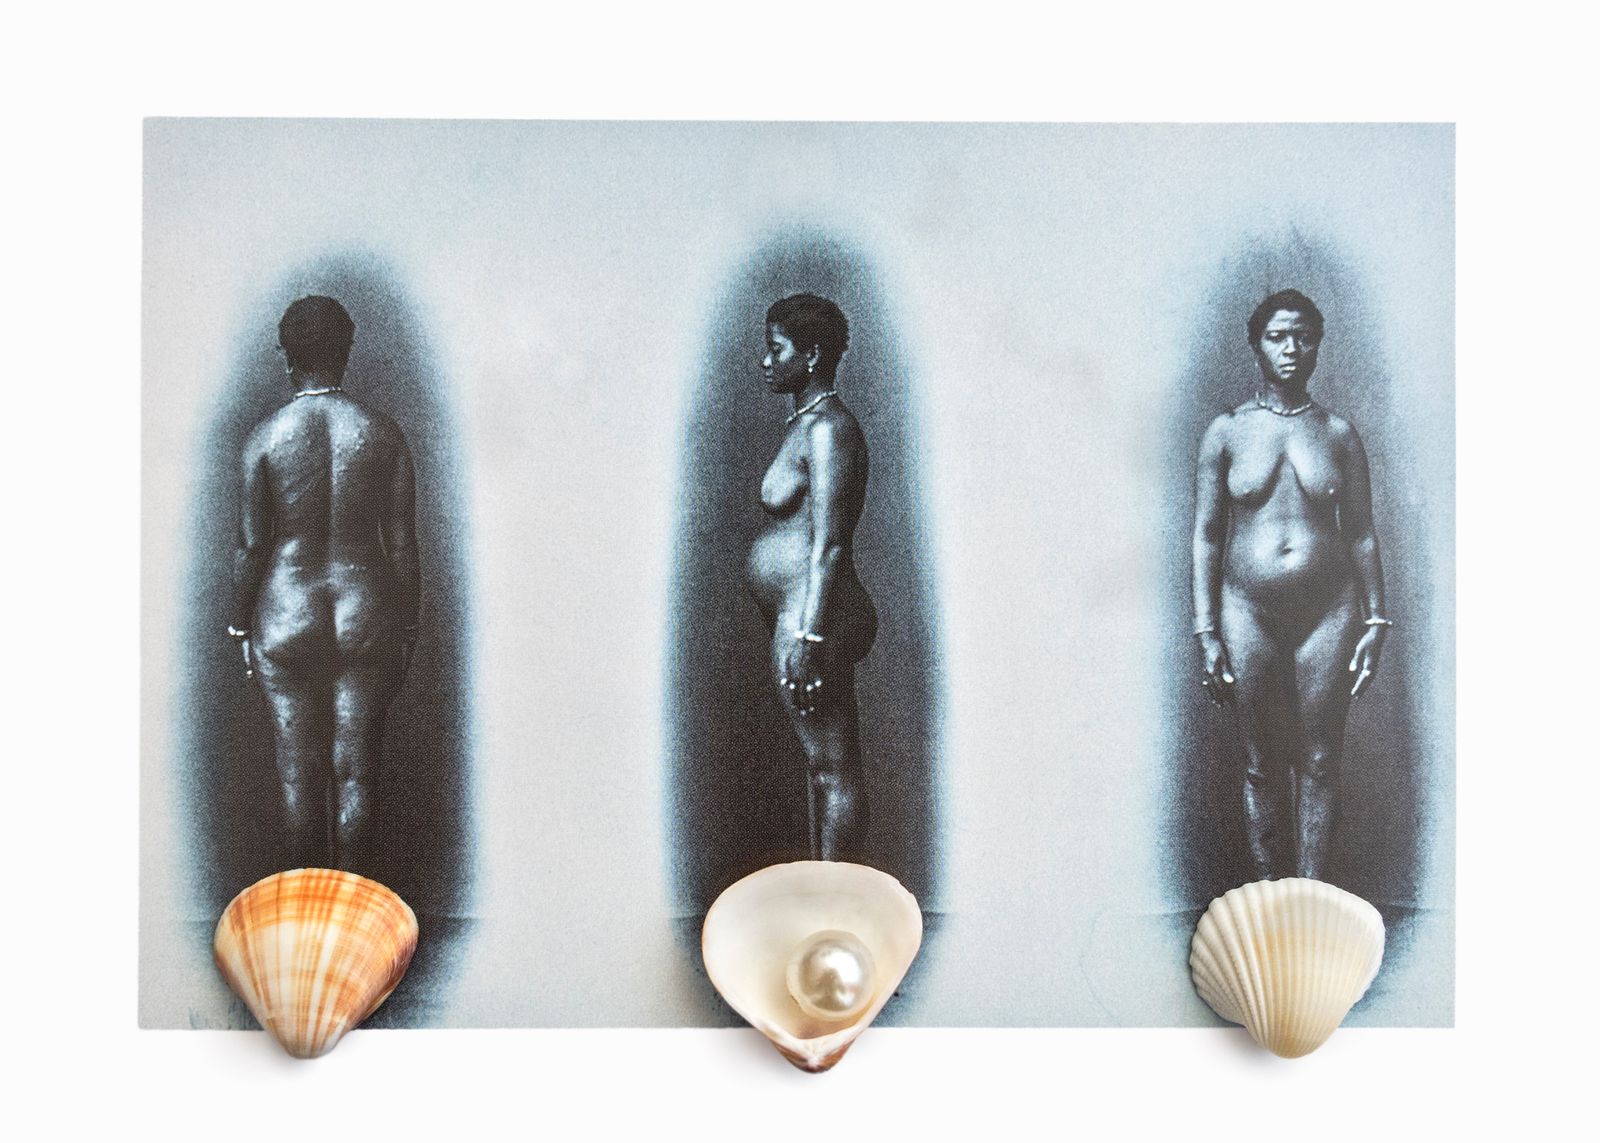 © Patricia Gouvêa - Venus of Gamboa #22016Interference on a book with photographs by Augusto Stahl,ca. 1885